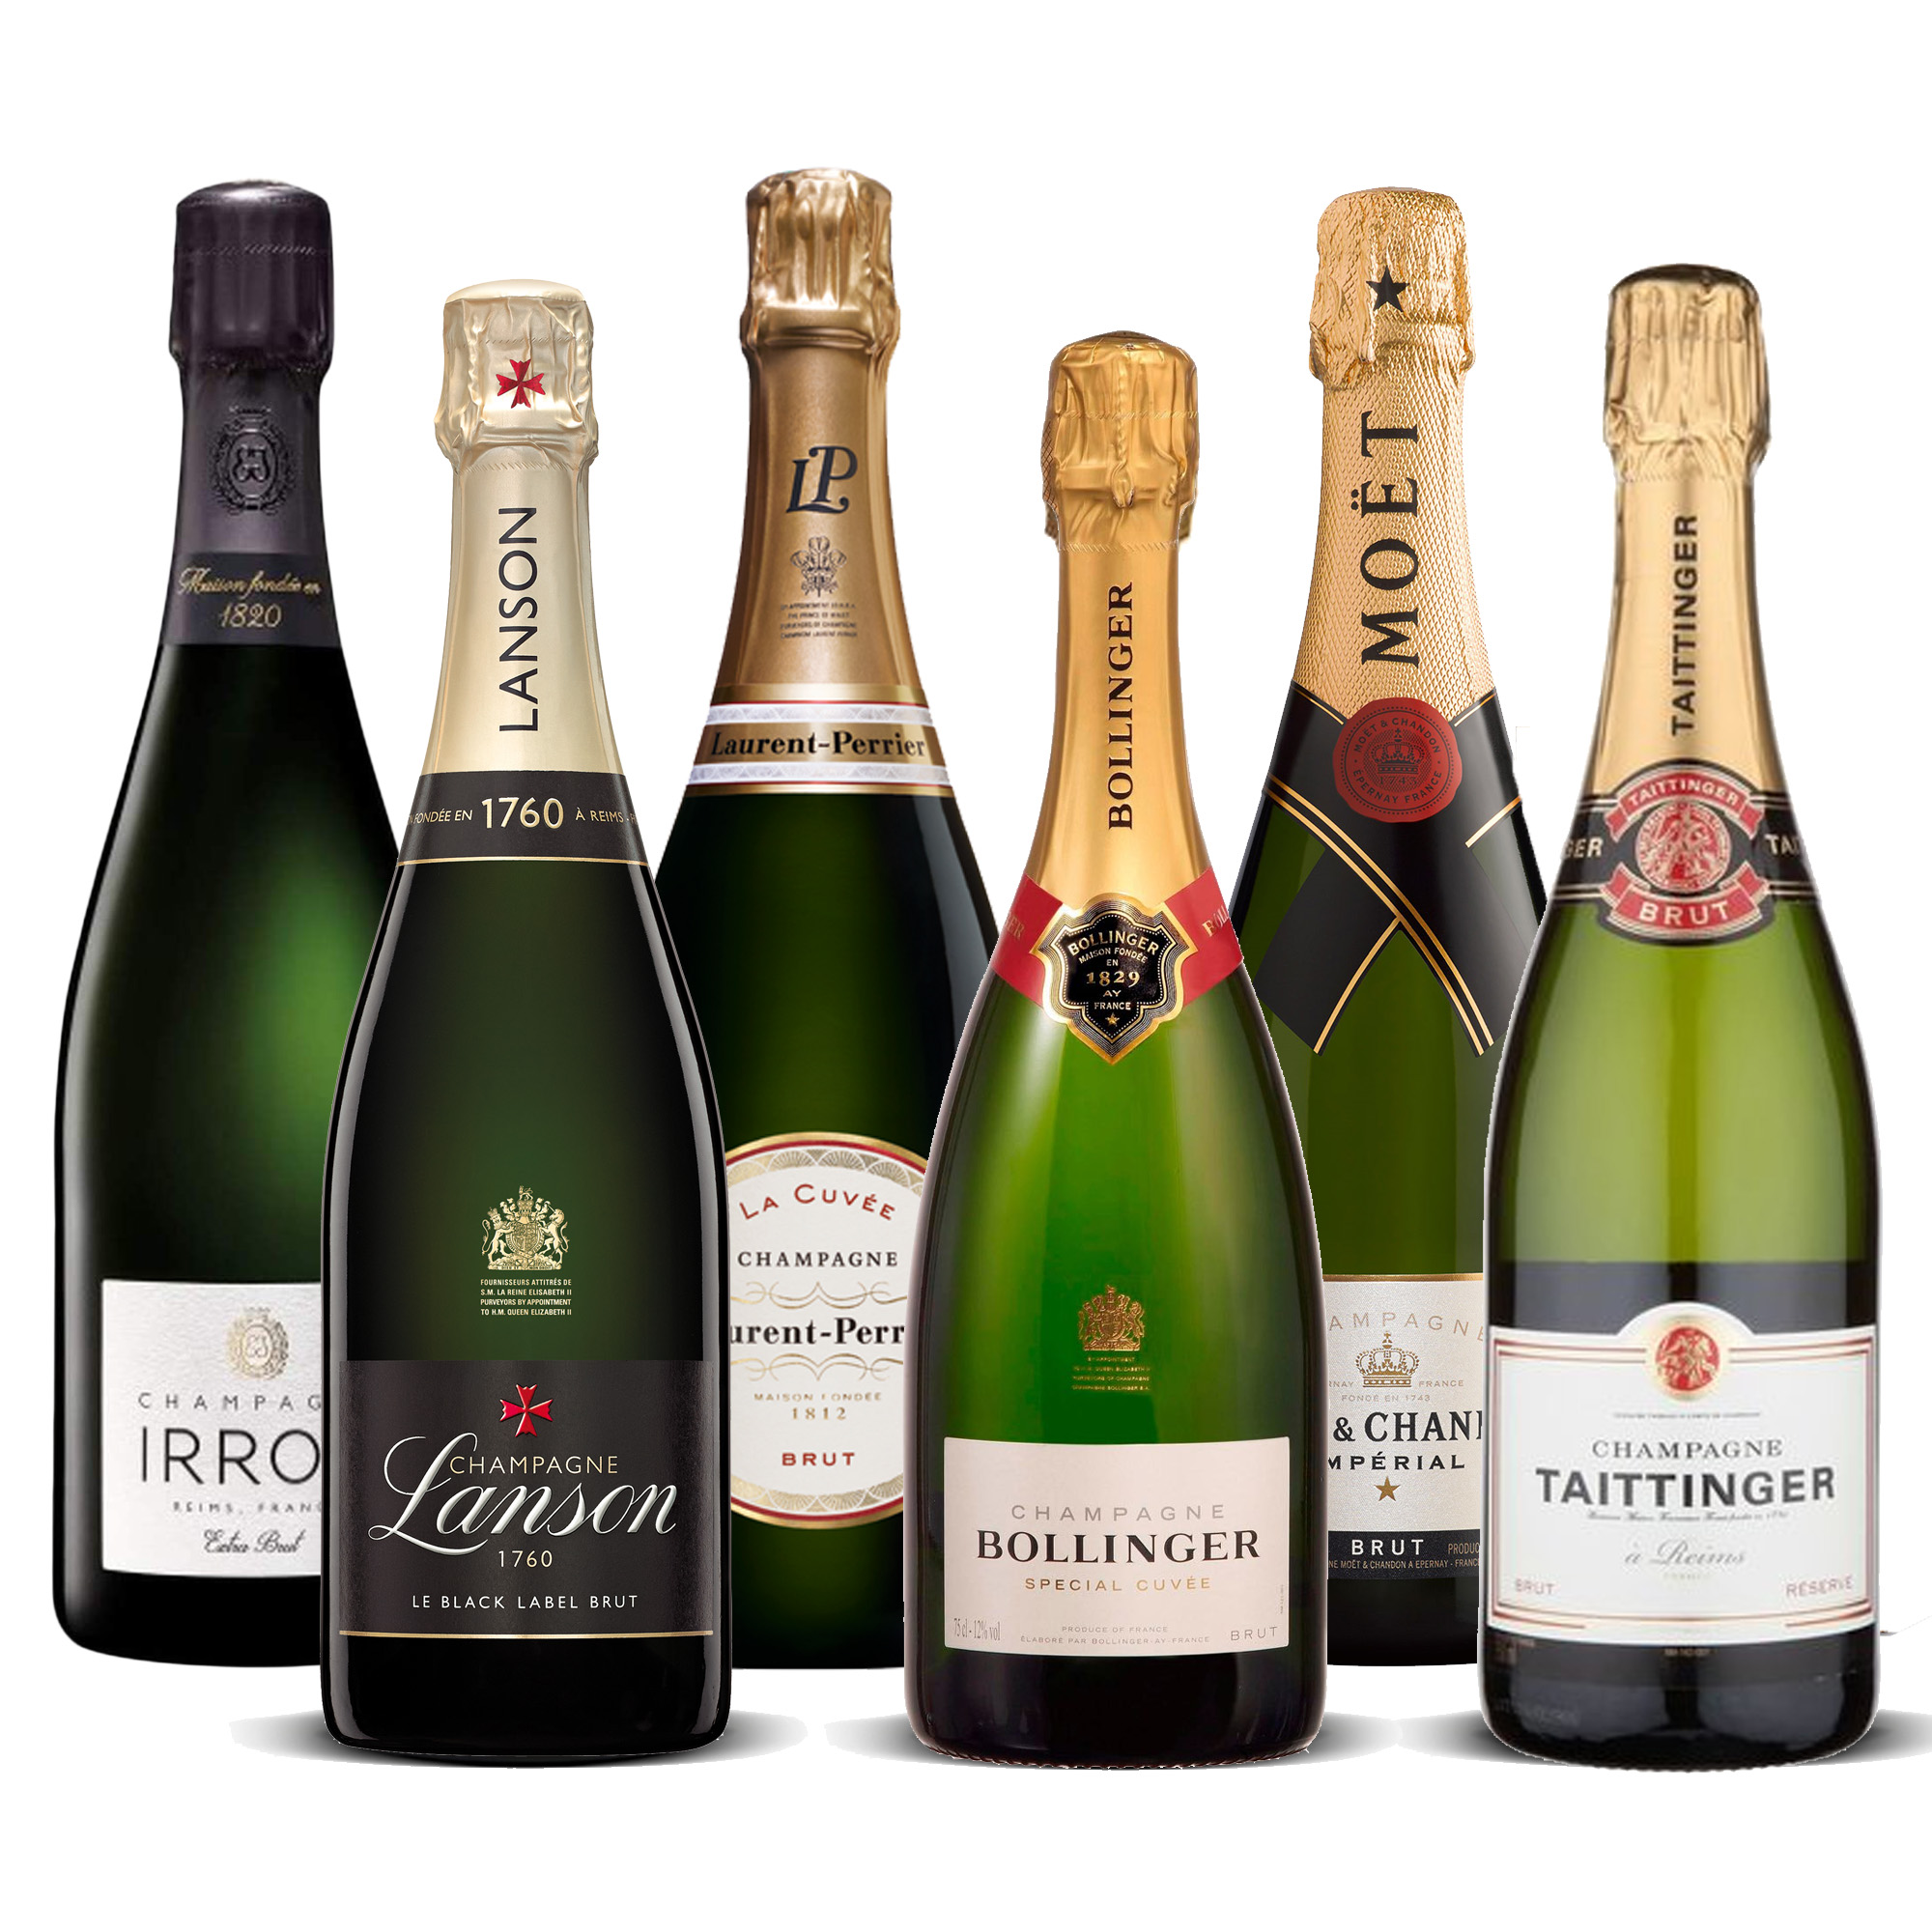 The Champagne Brut Collection 6 x 75cl